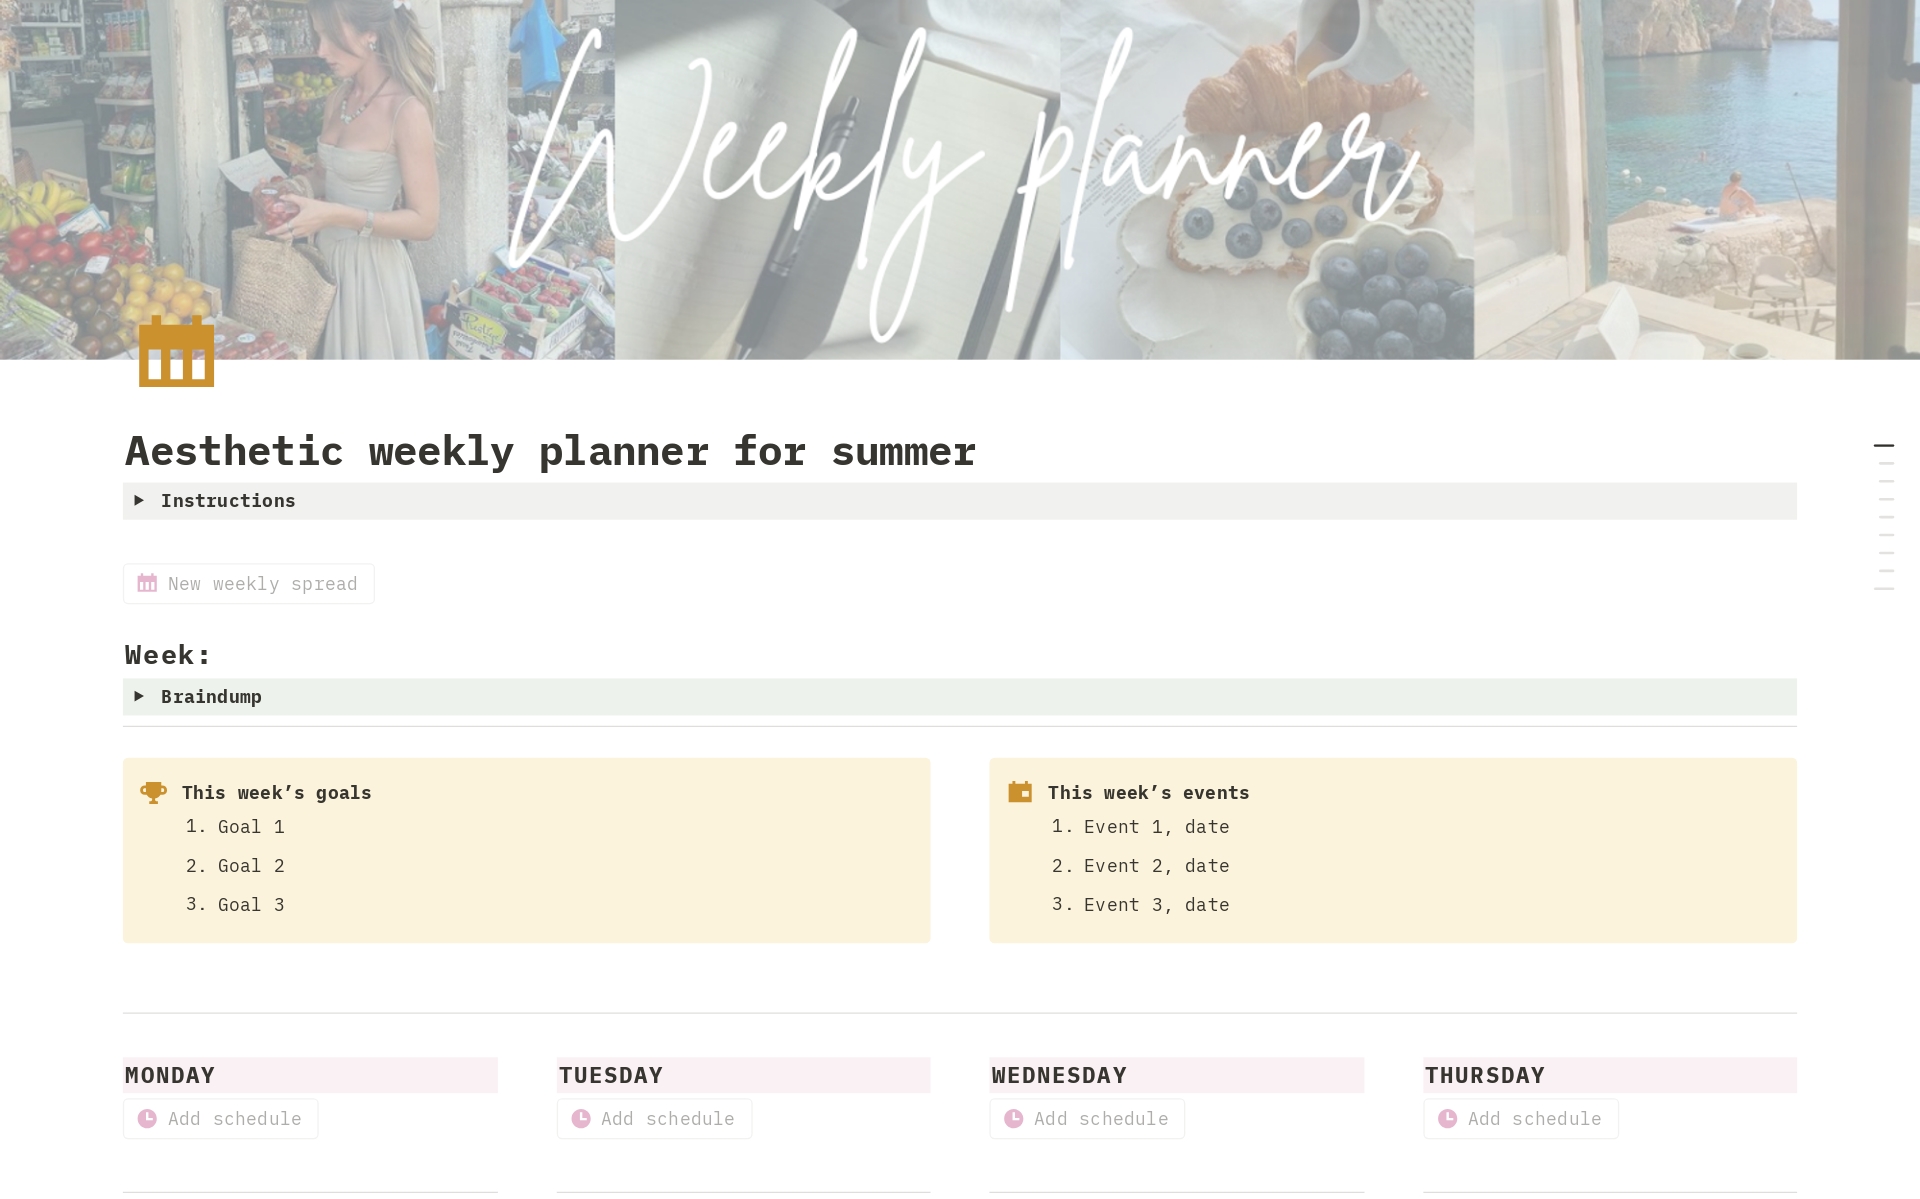 Minimalistic and easy to use weekly planner for summer.